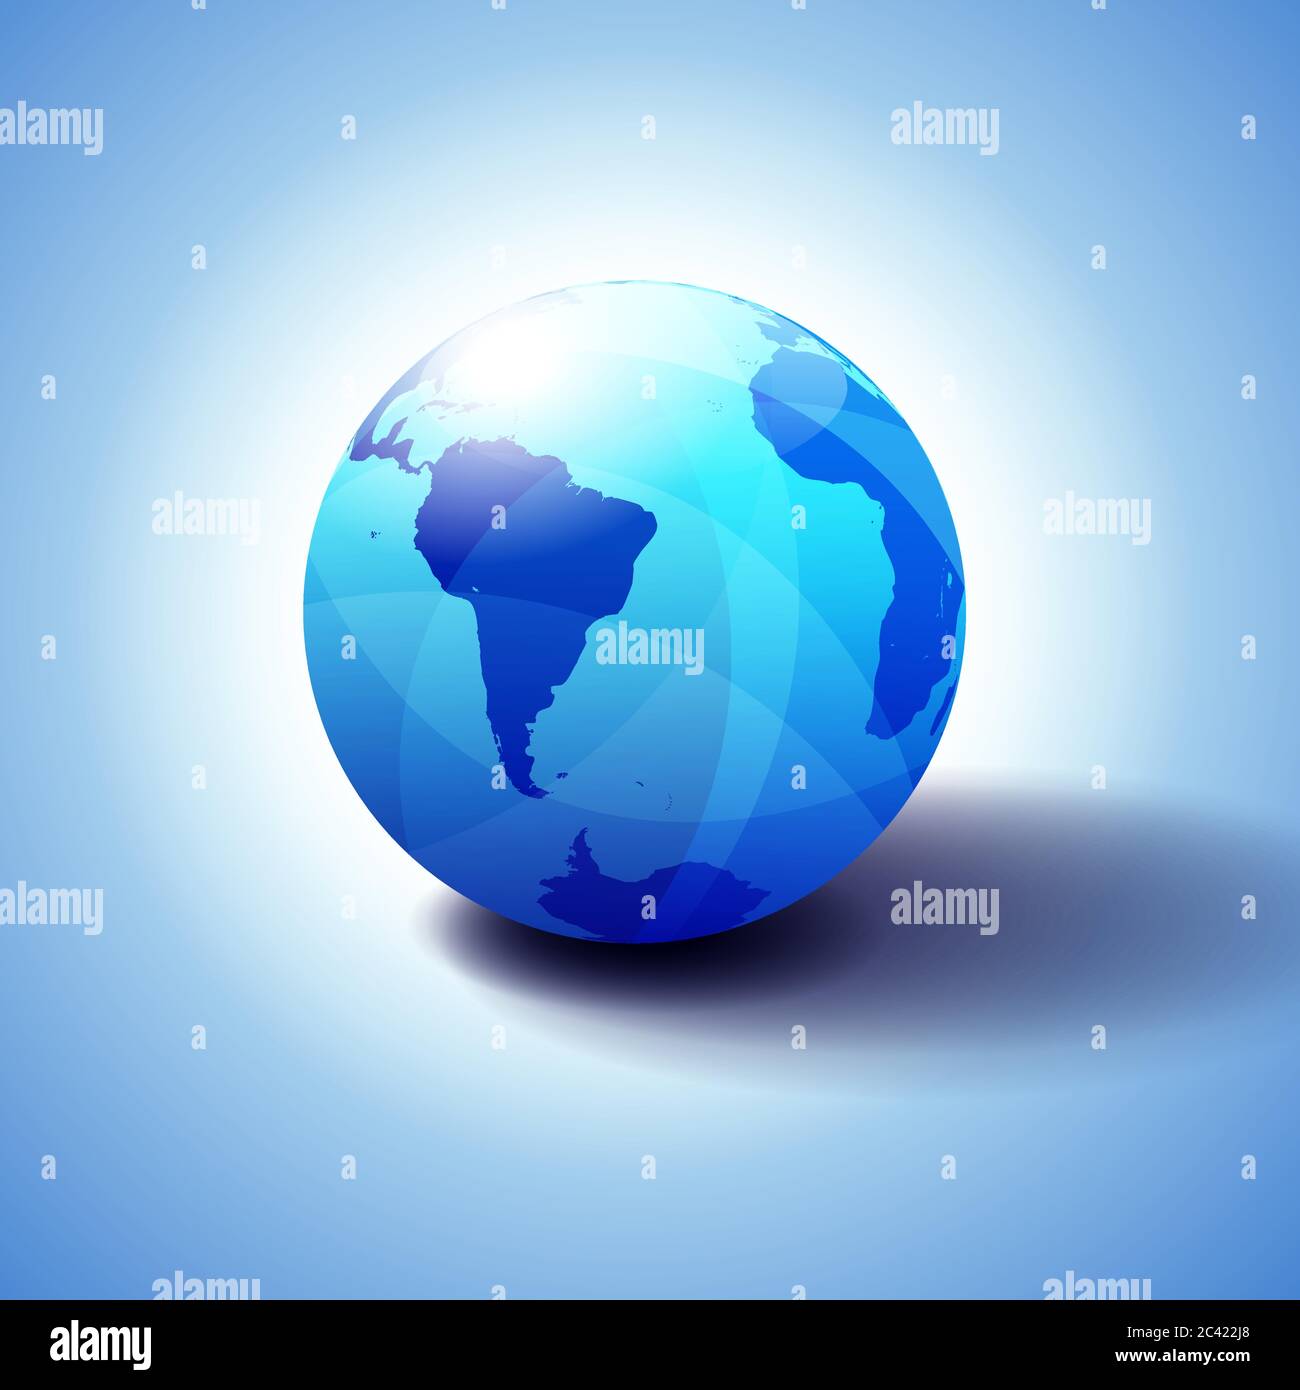 South America and Africa Global World Globe Icon 3D illustration, Glossy, Shiny Sphere with Global Map in Subtle Blues giving a transparent feel Stock Vector